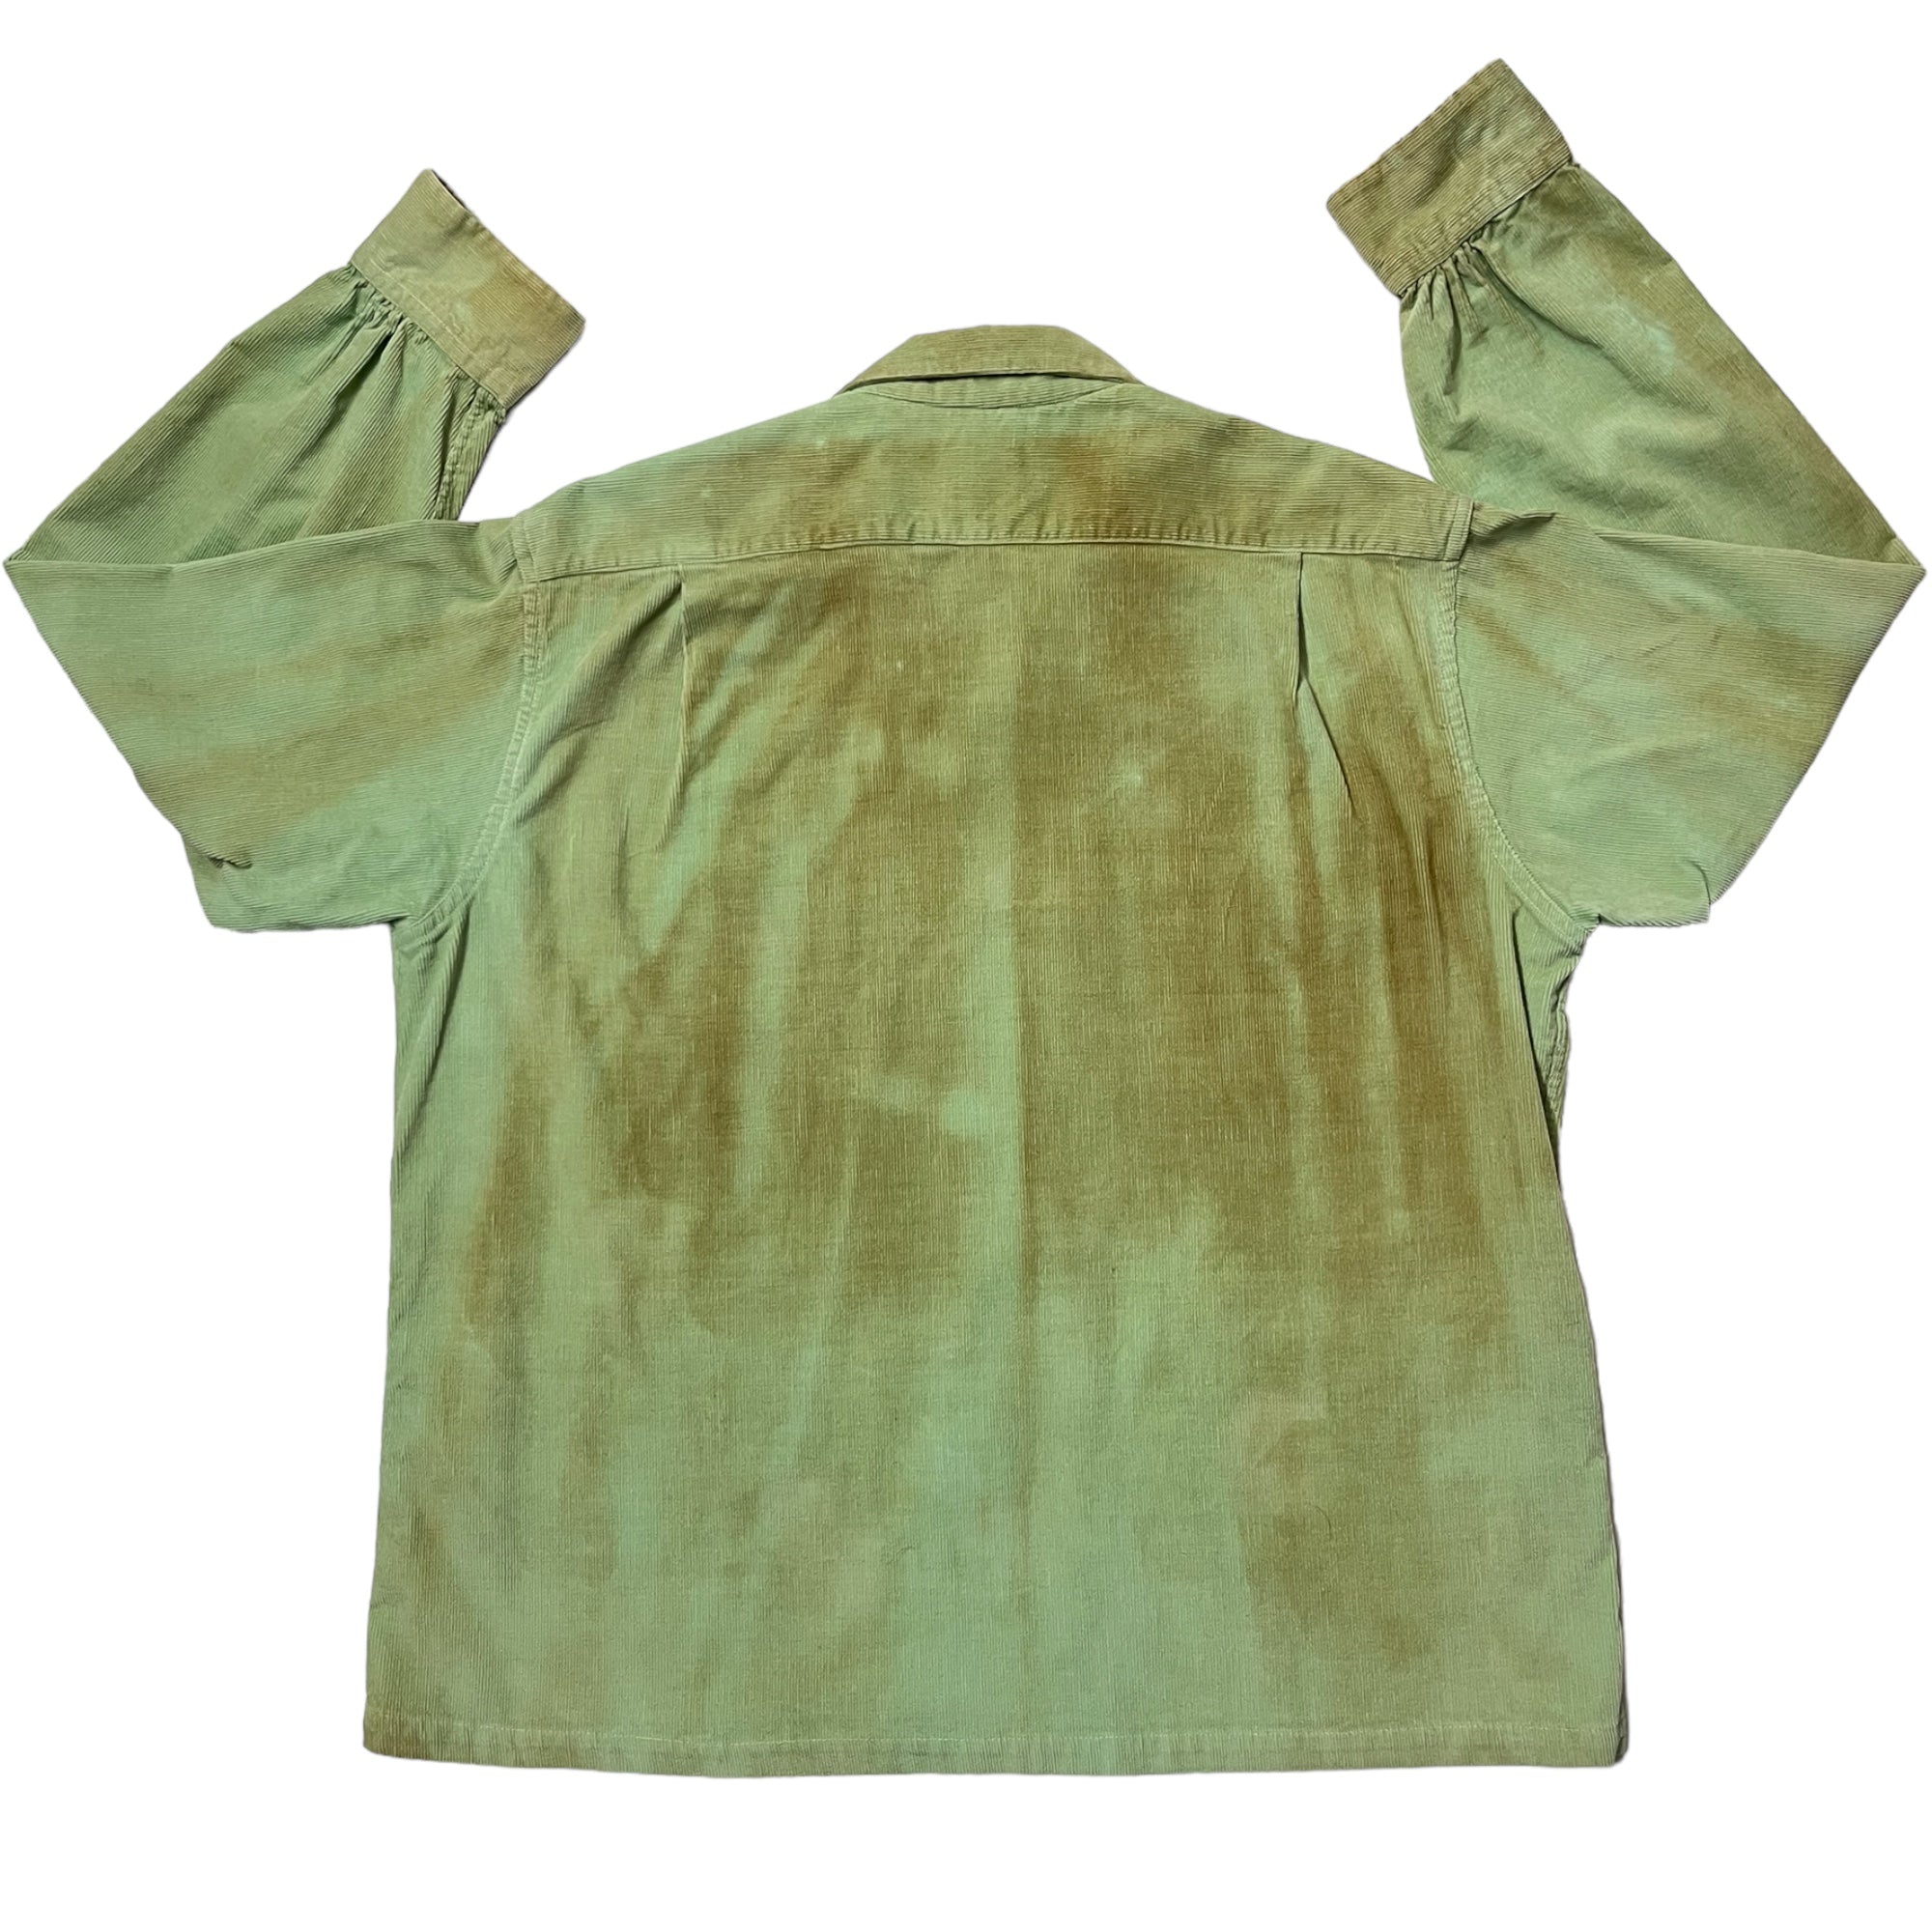 1950s Loop Collar Corduroy Distressed/Stained Shirt - Sea Foam Green - L/XL